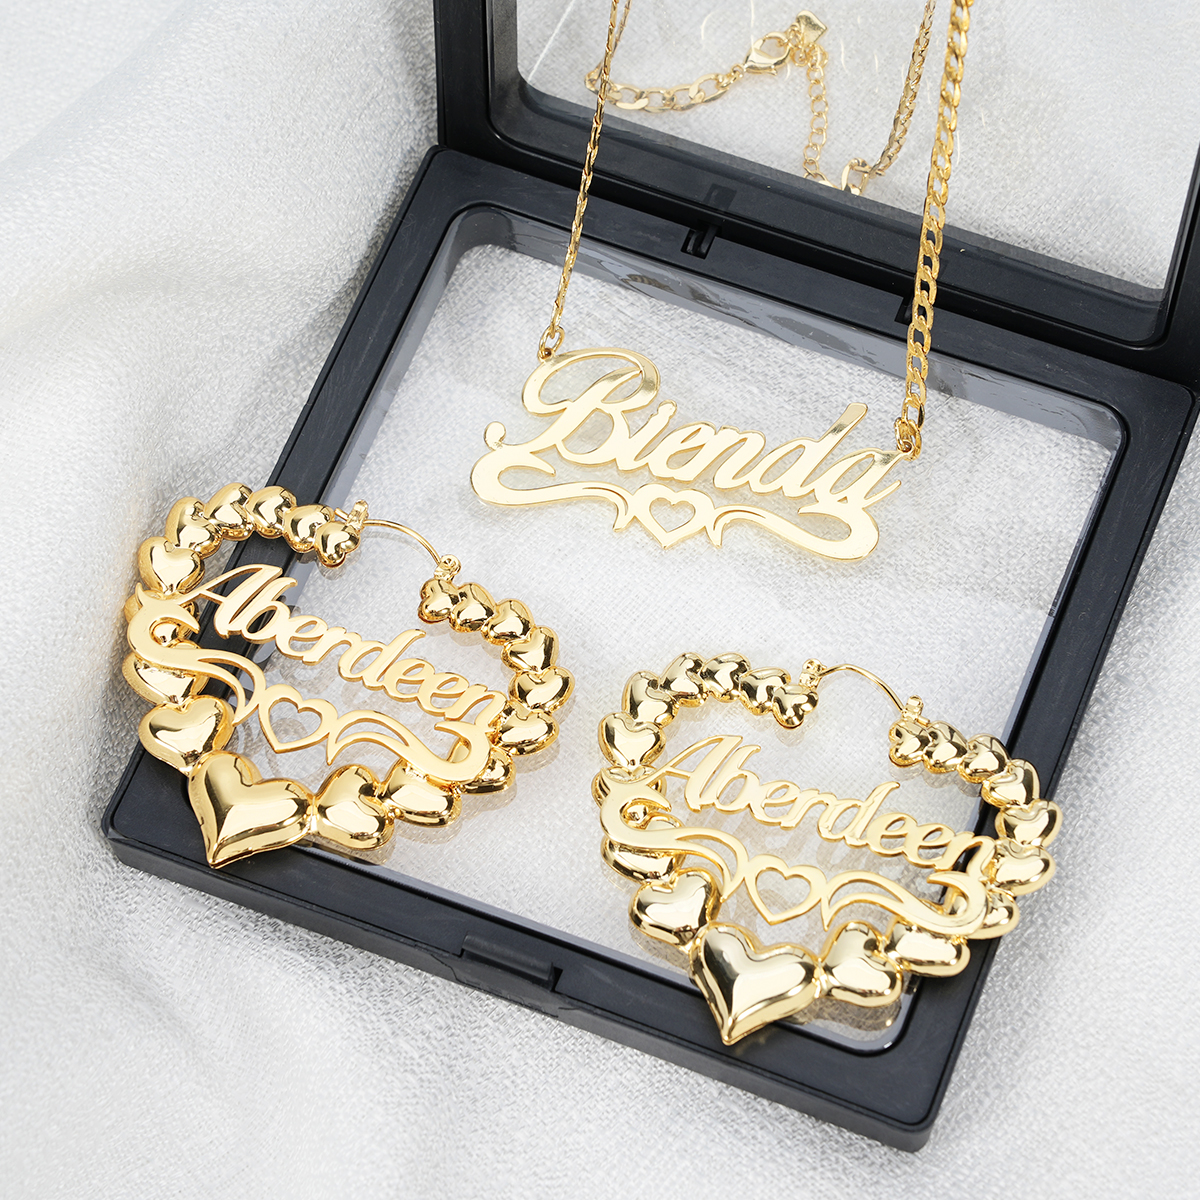 Personalized Hollow Heart Name Necklace And Bambom Earrings Jewelry Set 2pcs